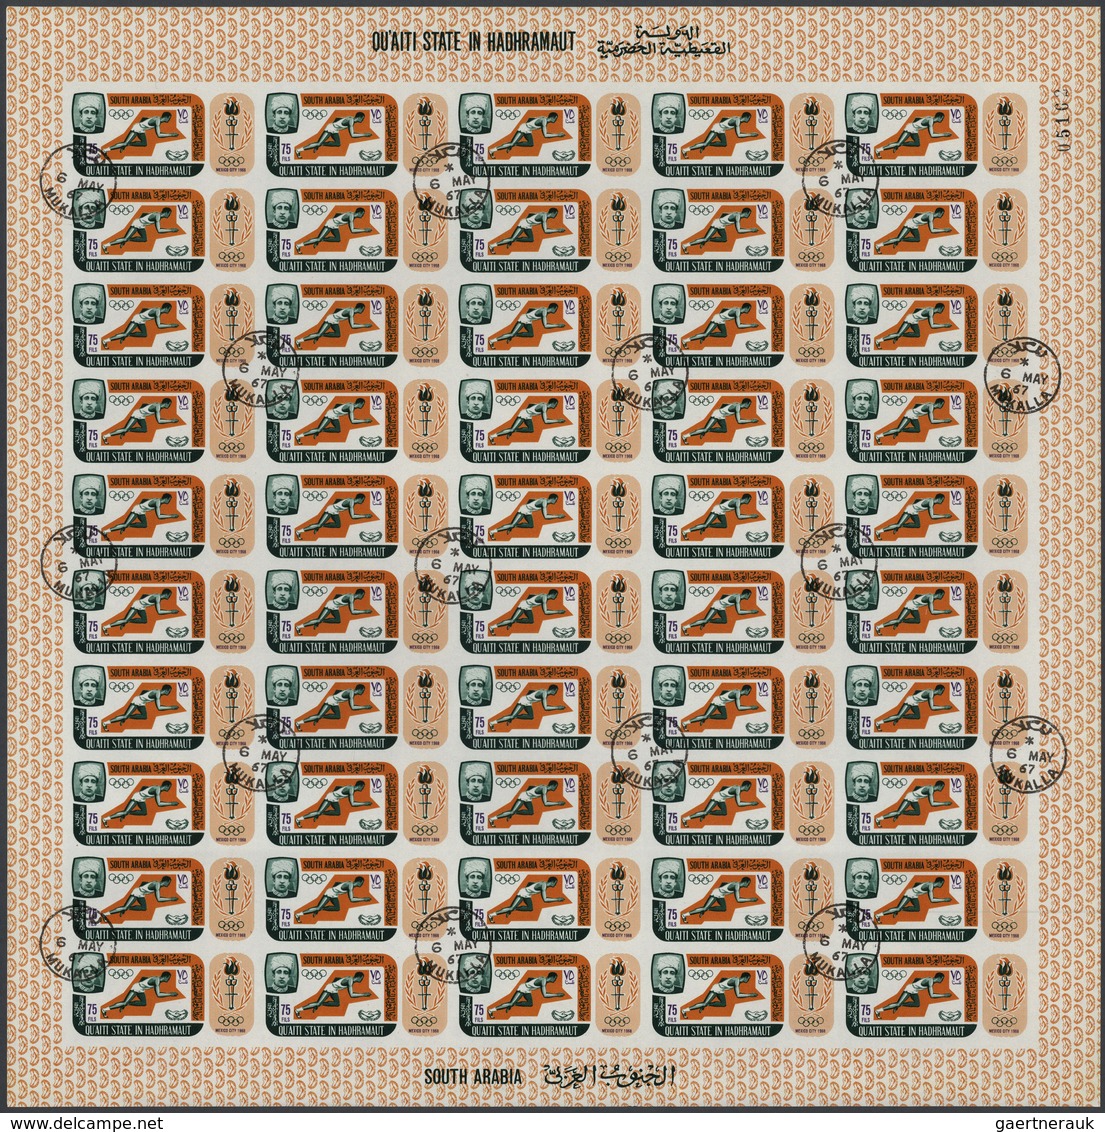 22033 Aden - Qu'aiti State In Hadhramaut: 1967, 75f. Olympic Games Mexico '68, Accumulation Of 6.950 Stamp - Yémen